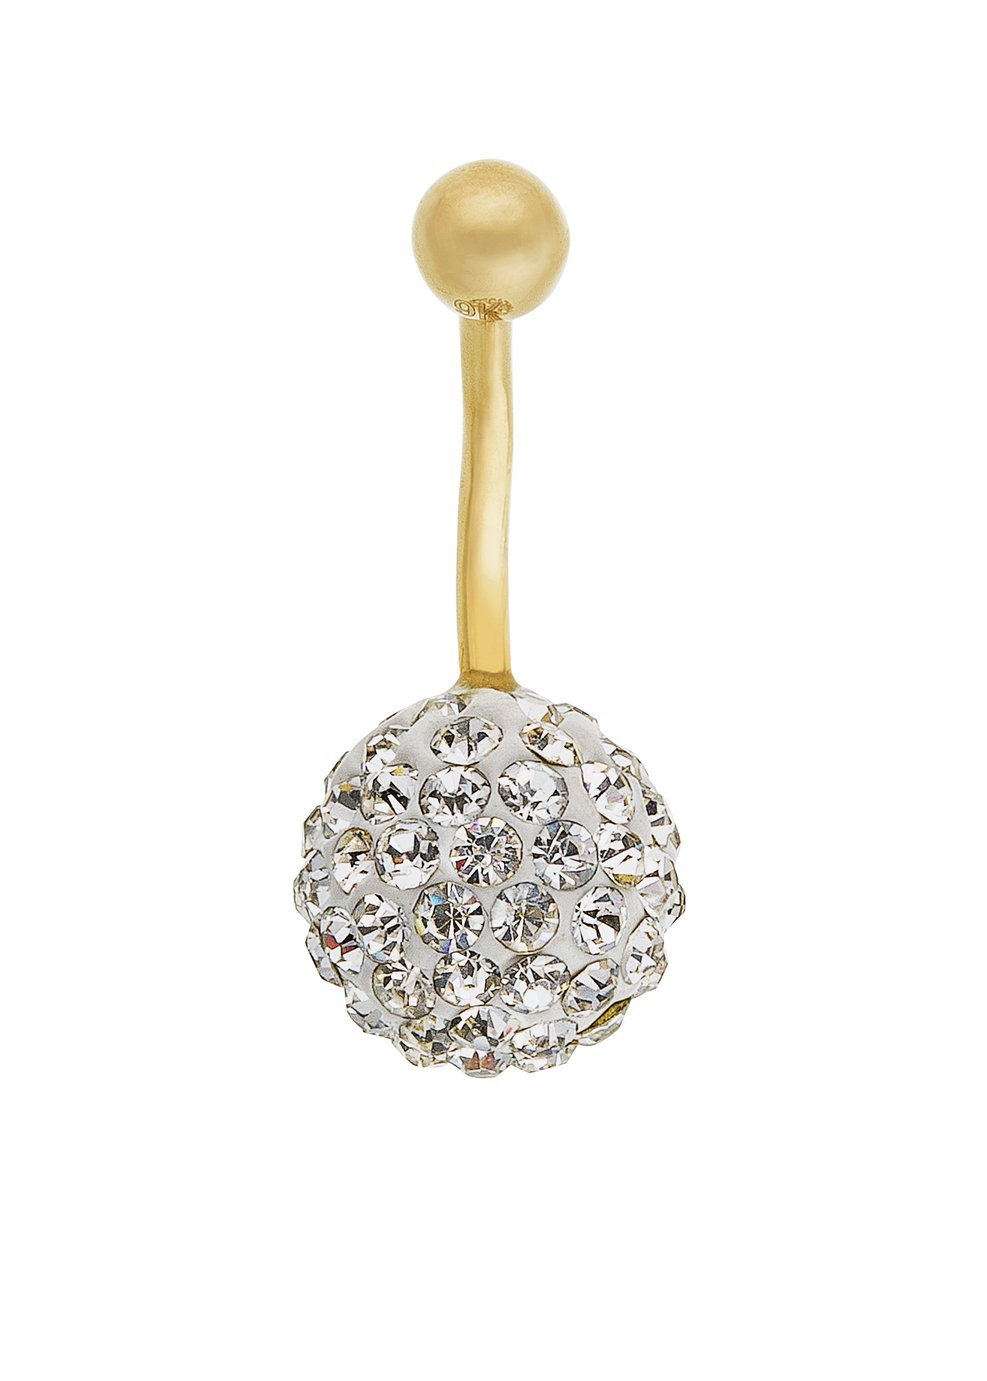 State of Mine 9ct Gold Glitter Ball Belly Bar